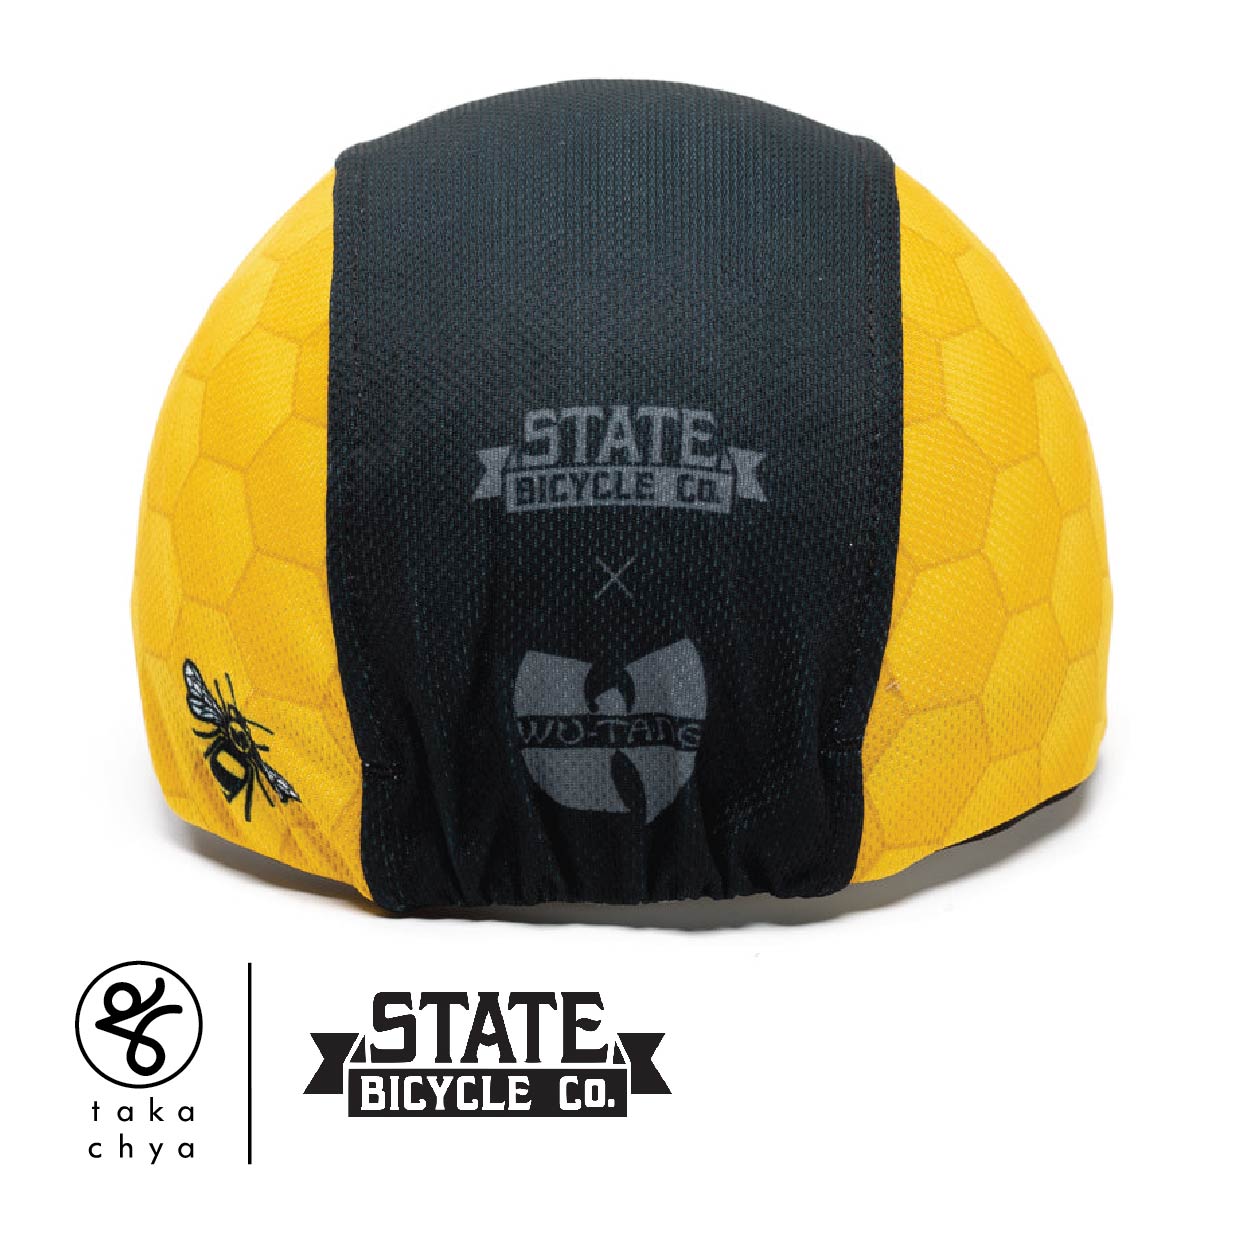 Shop Wu-Tang Clan Bike: Where to Buy State Bicycle Co. Collaboration